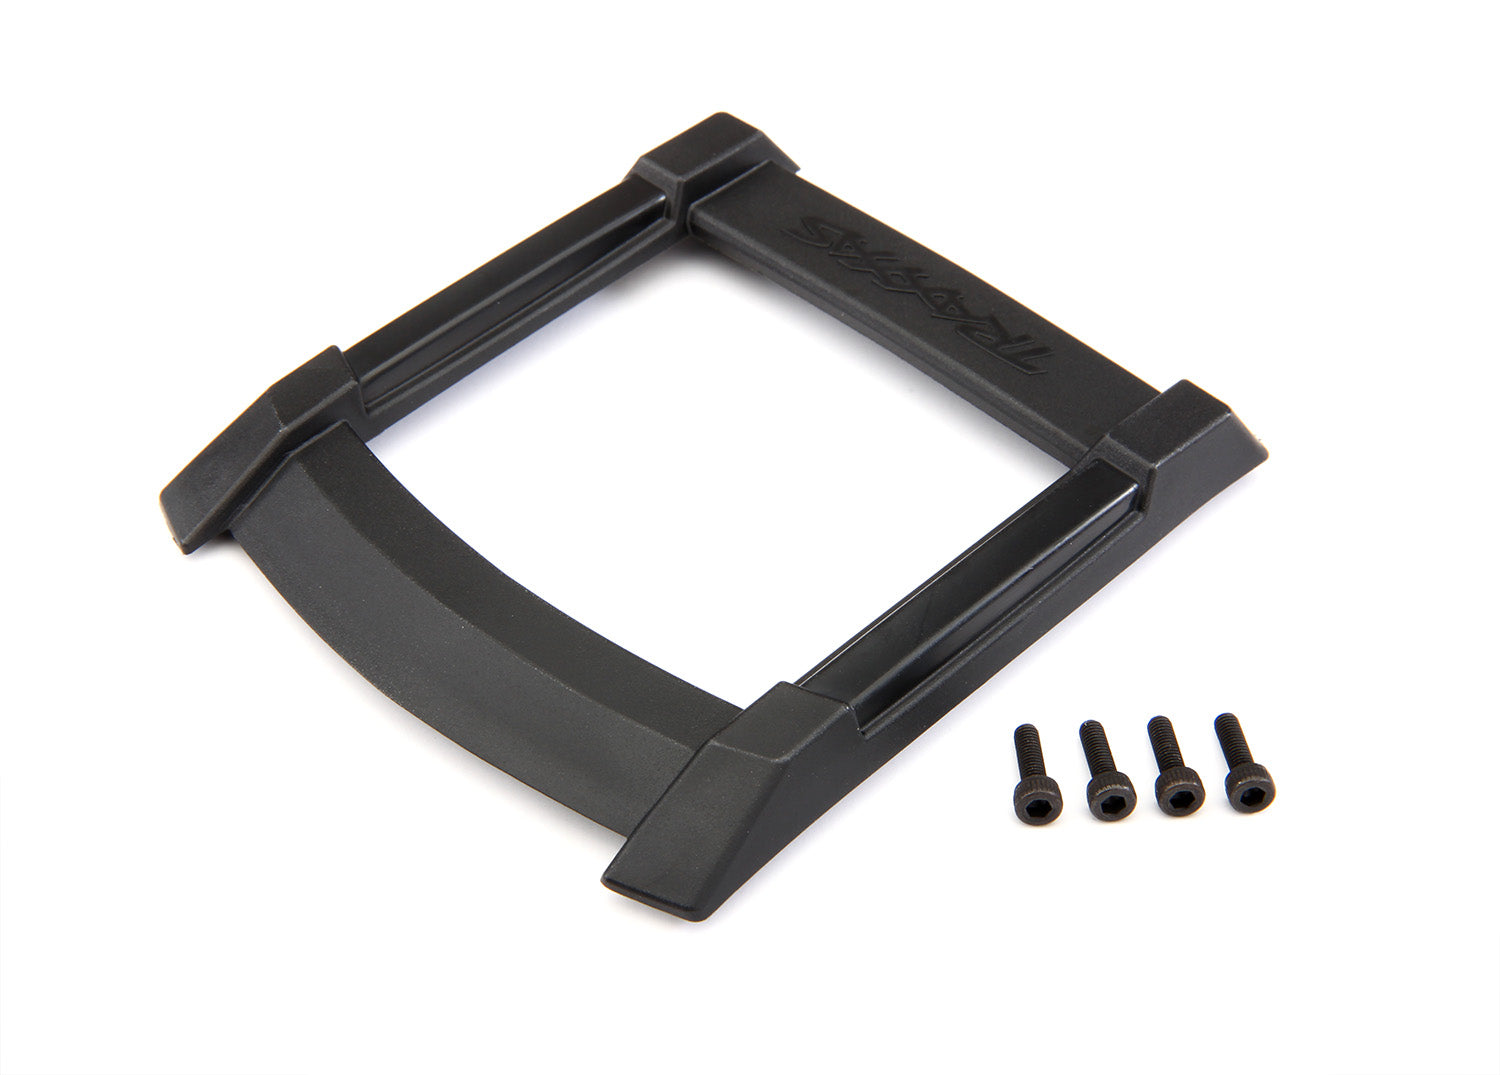 Traxxas Maxx Roof Body Skid Plate (Varios colores)